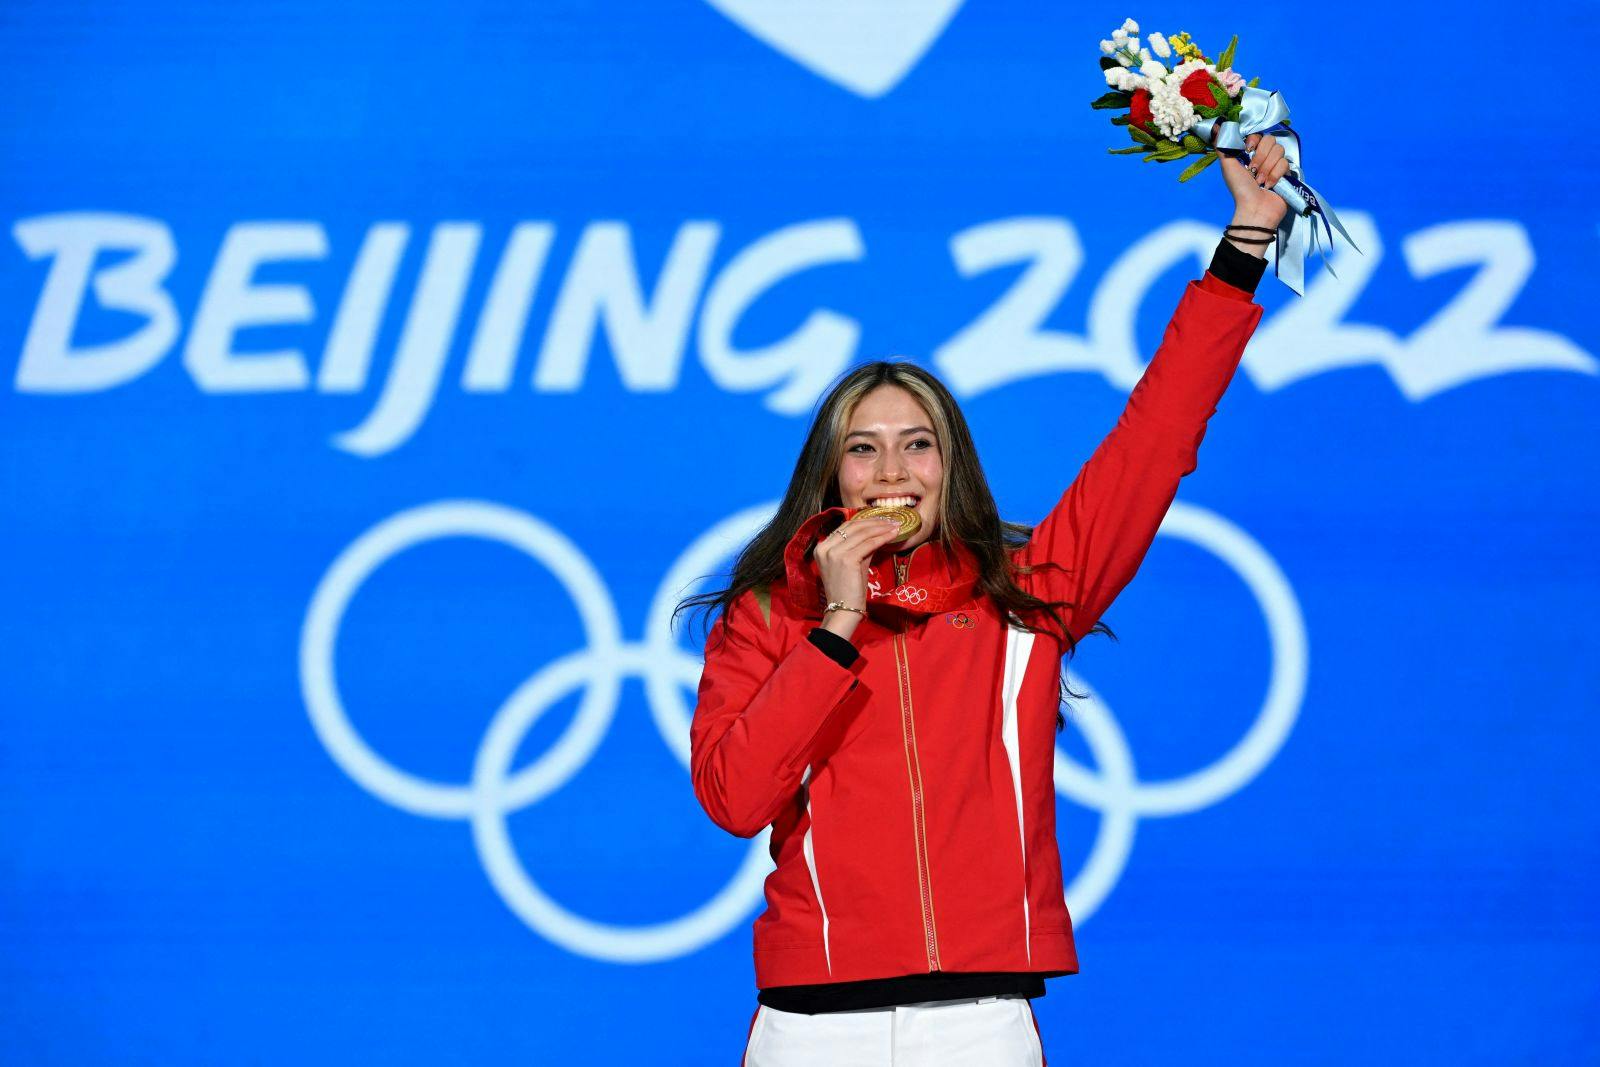 Gold medalist Eileen (Ailing) Gu of China celebrates her women's big air victory at the Beijing Medals Plaza in Beijing on February 8, 2022. (MANAN VATSYAYANA/AFP via Getty Images)